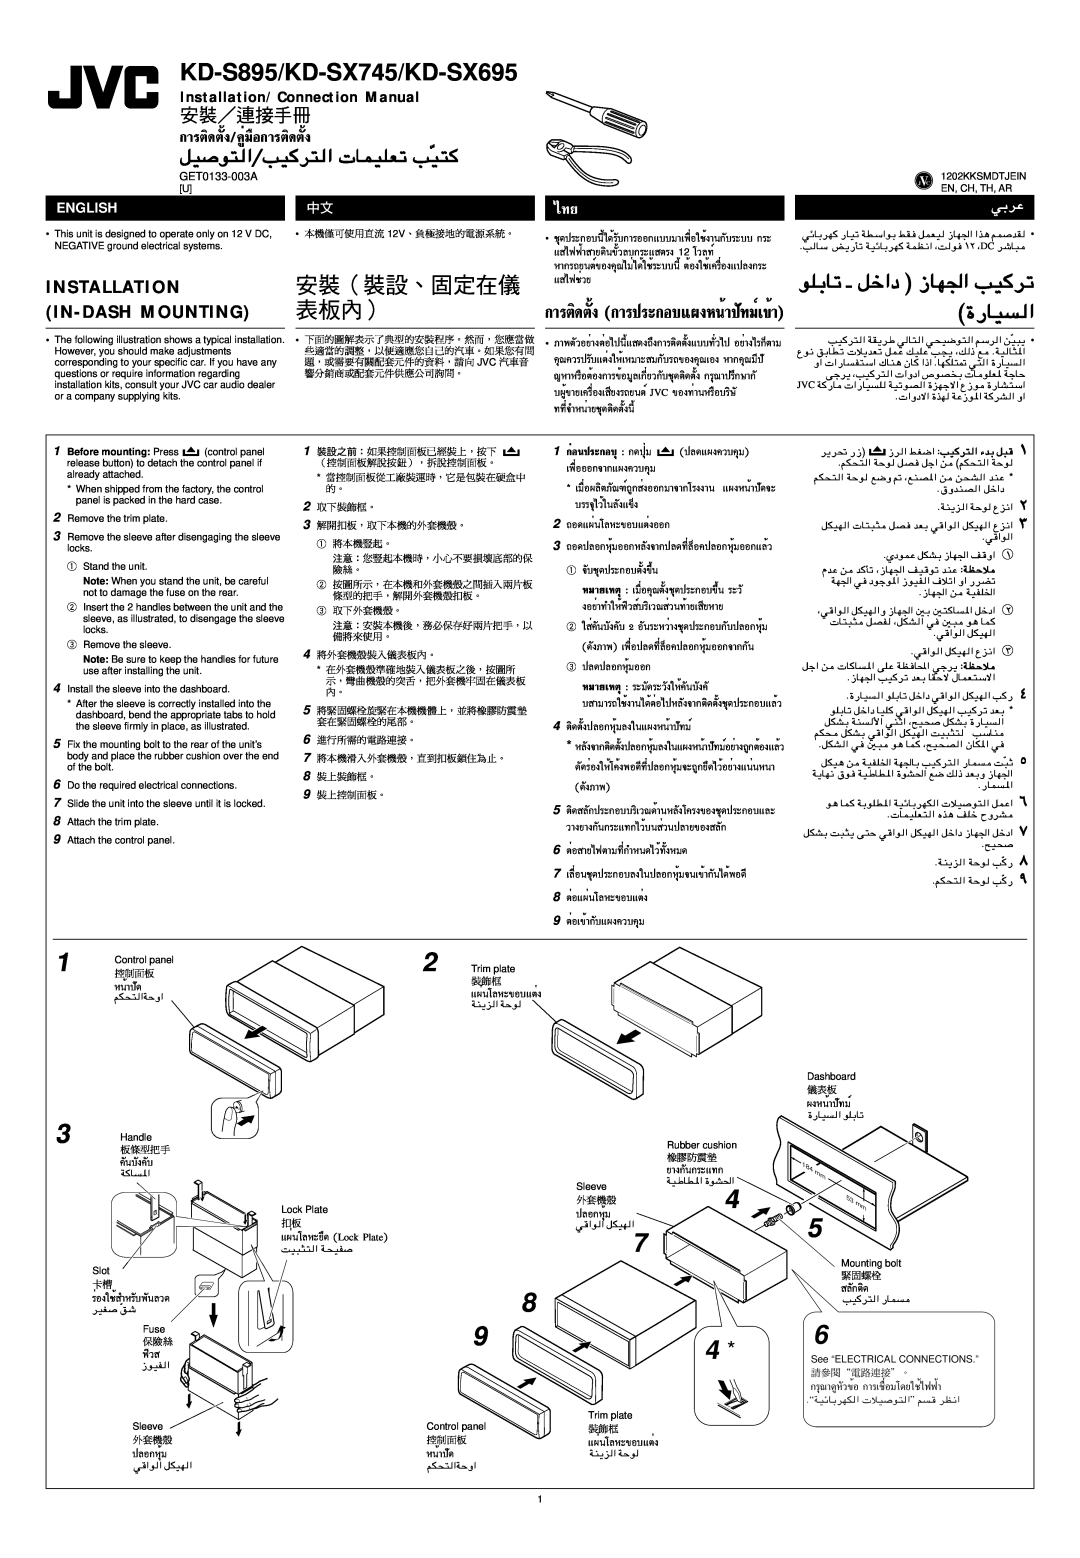 JVC manual Installation In-Dashmounting, English, wÐdŽ, KD-S895/KD-SX745/KD-SX695, Installation/Connection Manual 